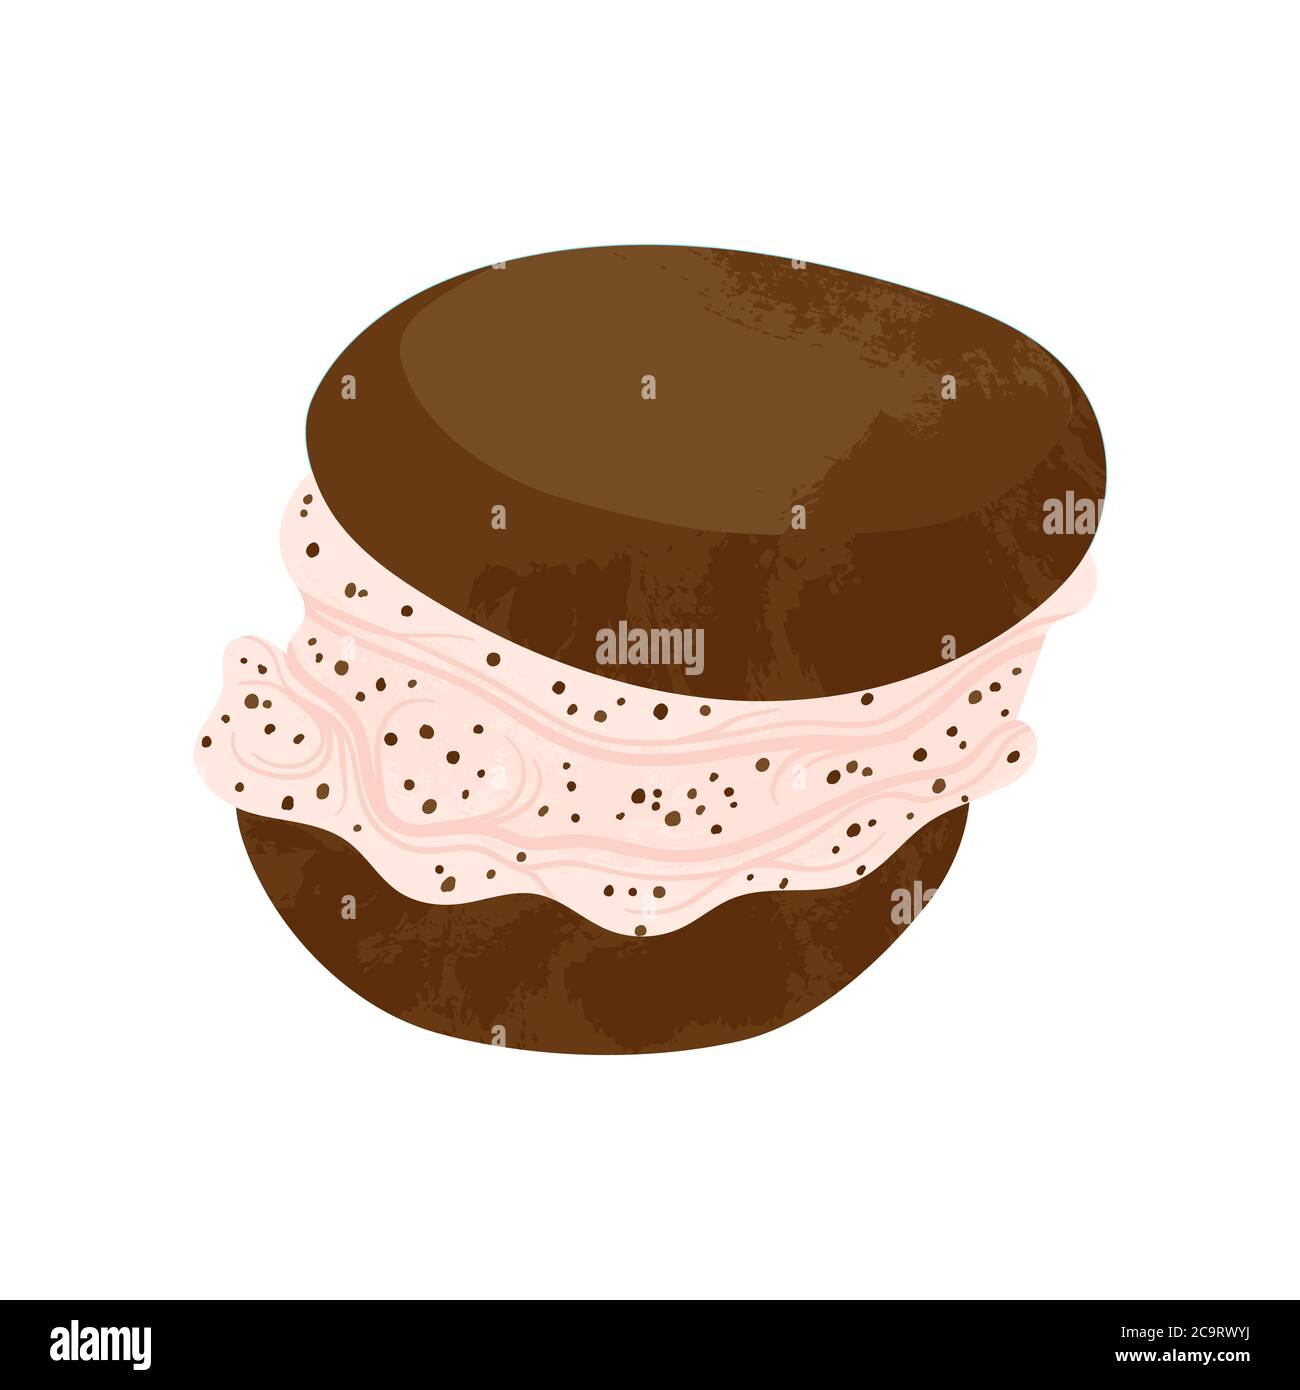 Chocolate mousse cake Stock Vector Images - Alamy